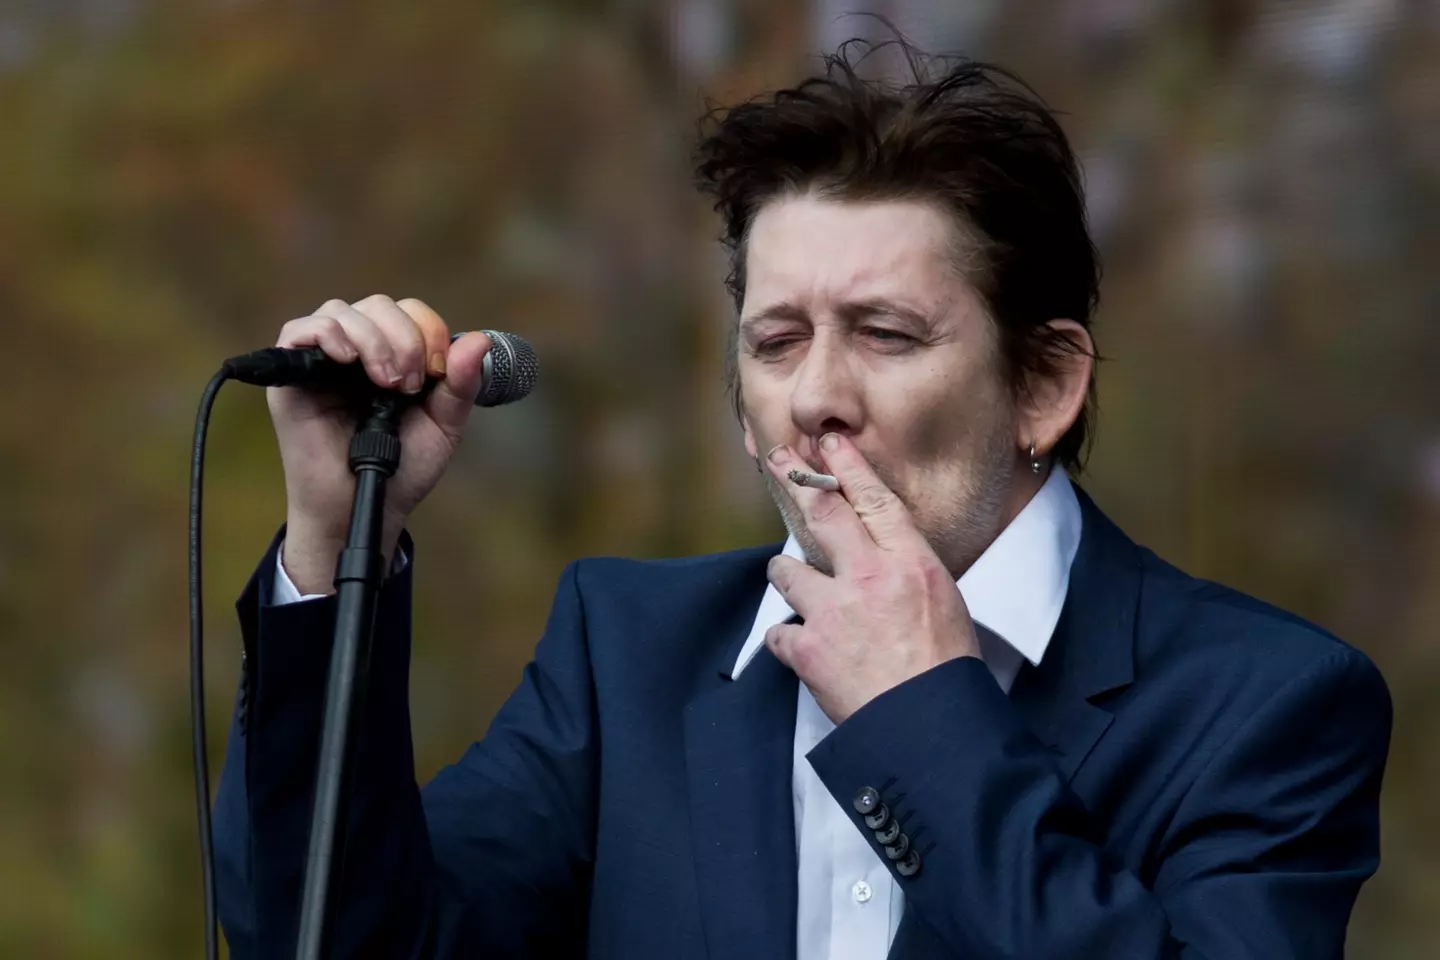 MacGowan fronted the iconic Celtic punk band The Pogues.